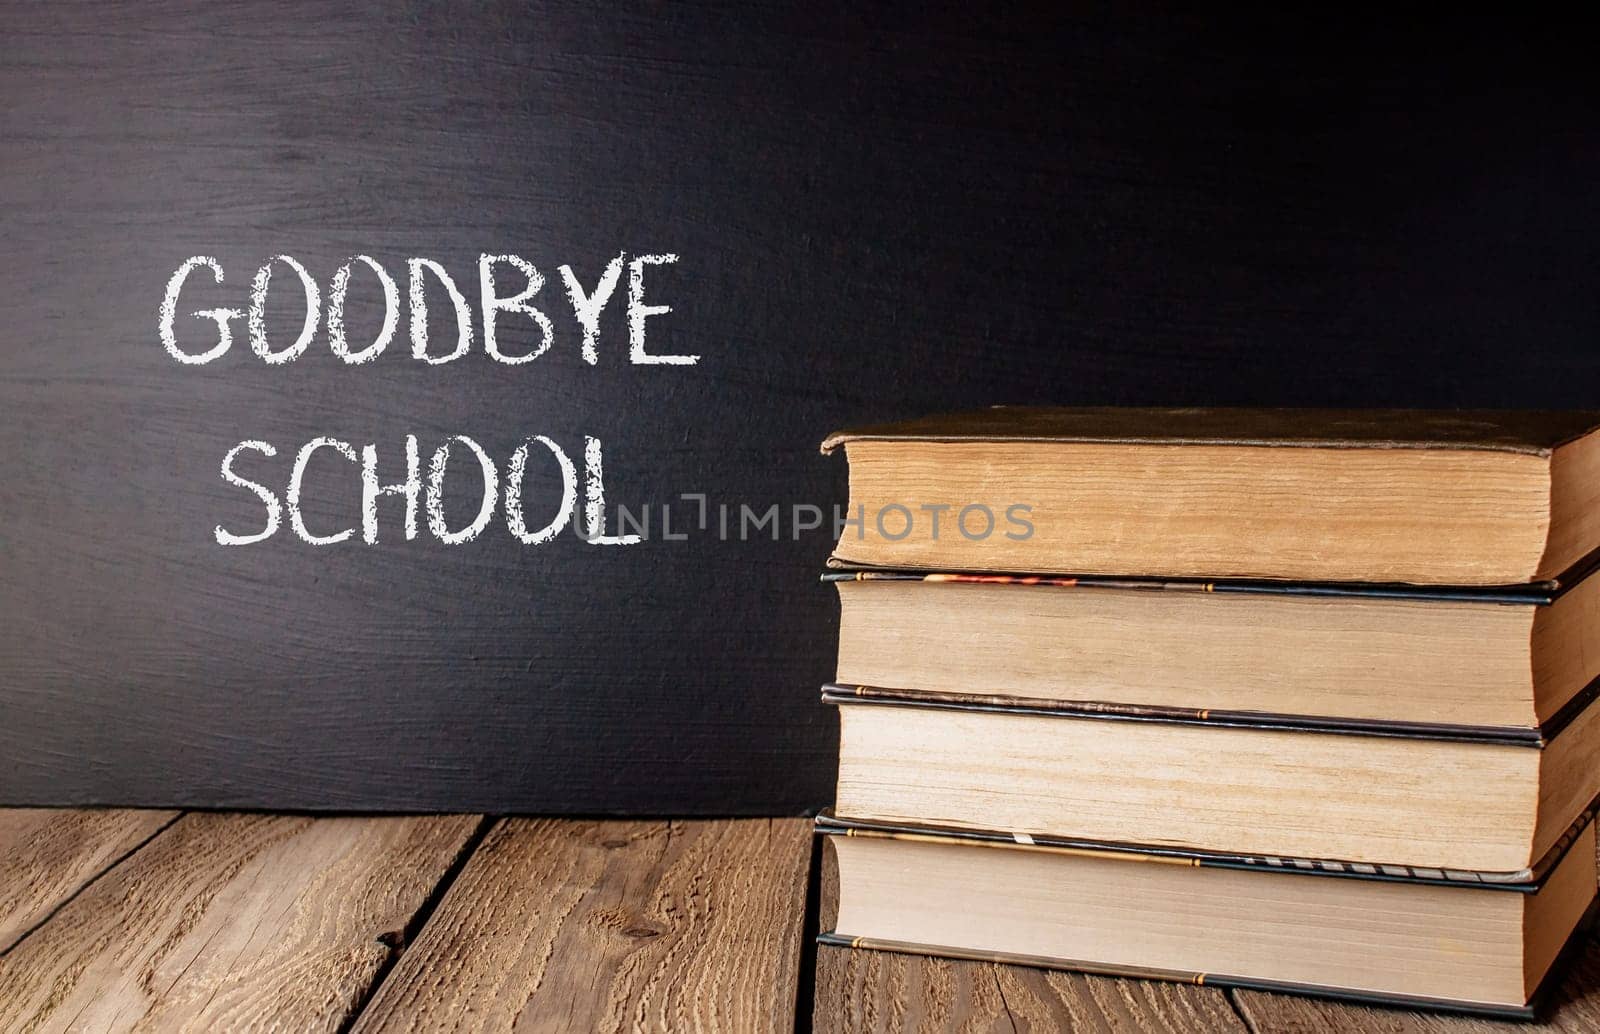 A stack of books with the word Goodbye School written on a chalkboard. The books are piled on top of each other, creating a sense of nostalgia and longing for the past